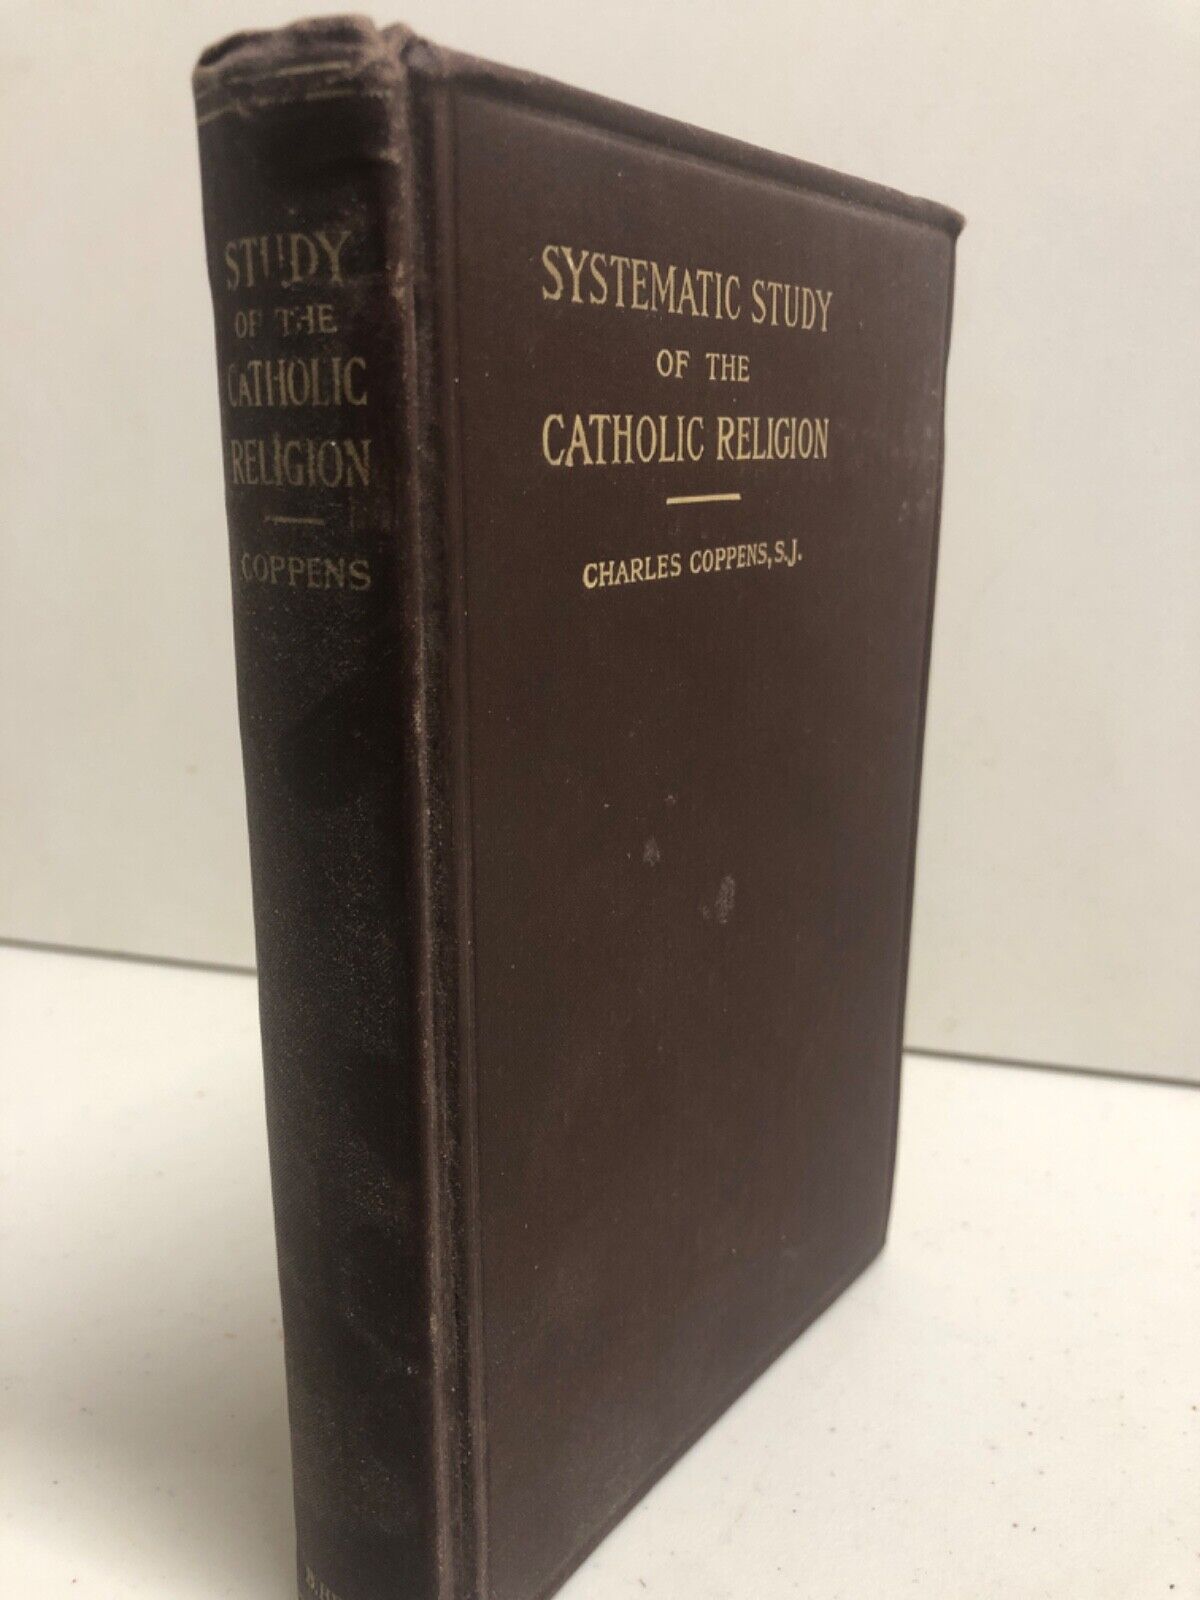 1914 Systematic Study of the Catholic Religion Coppens